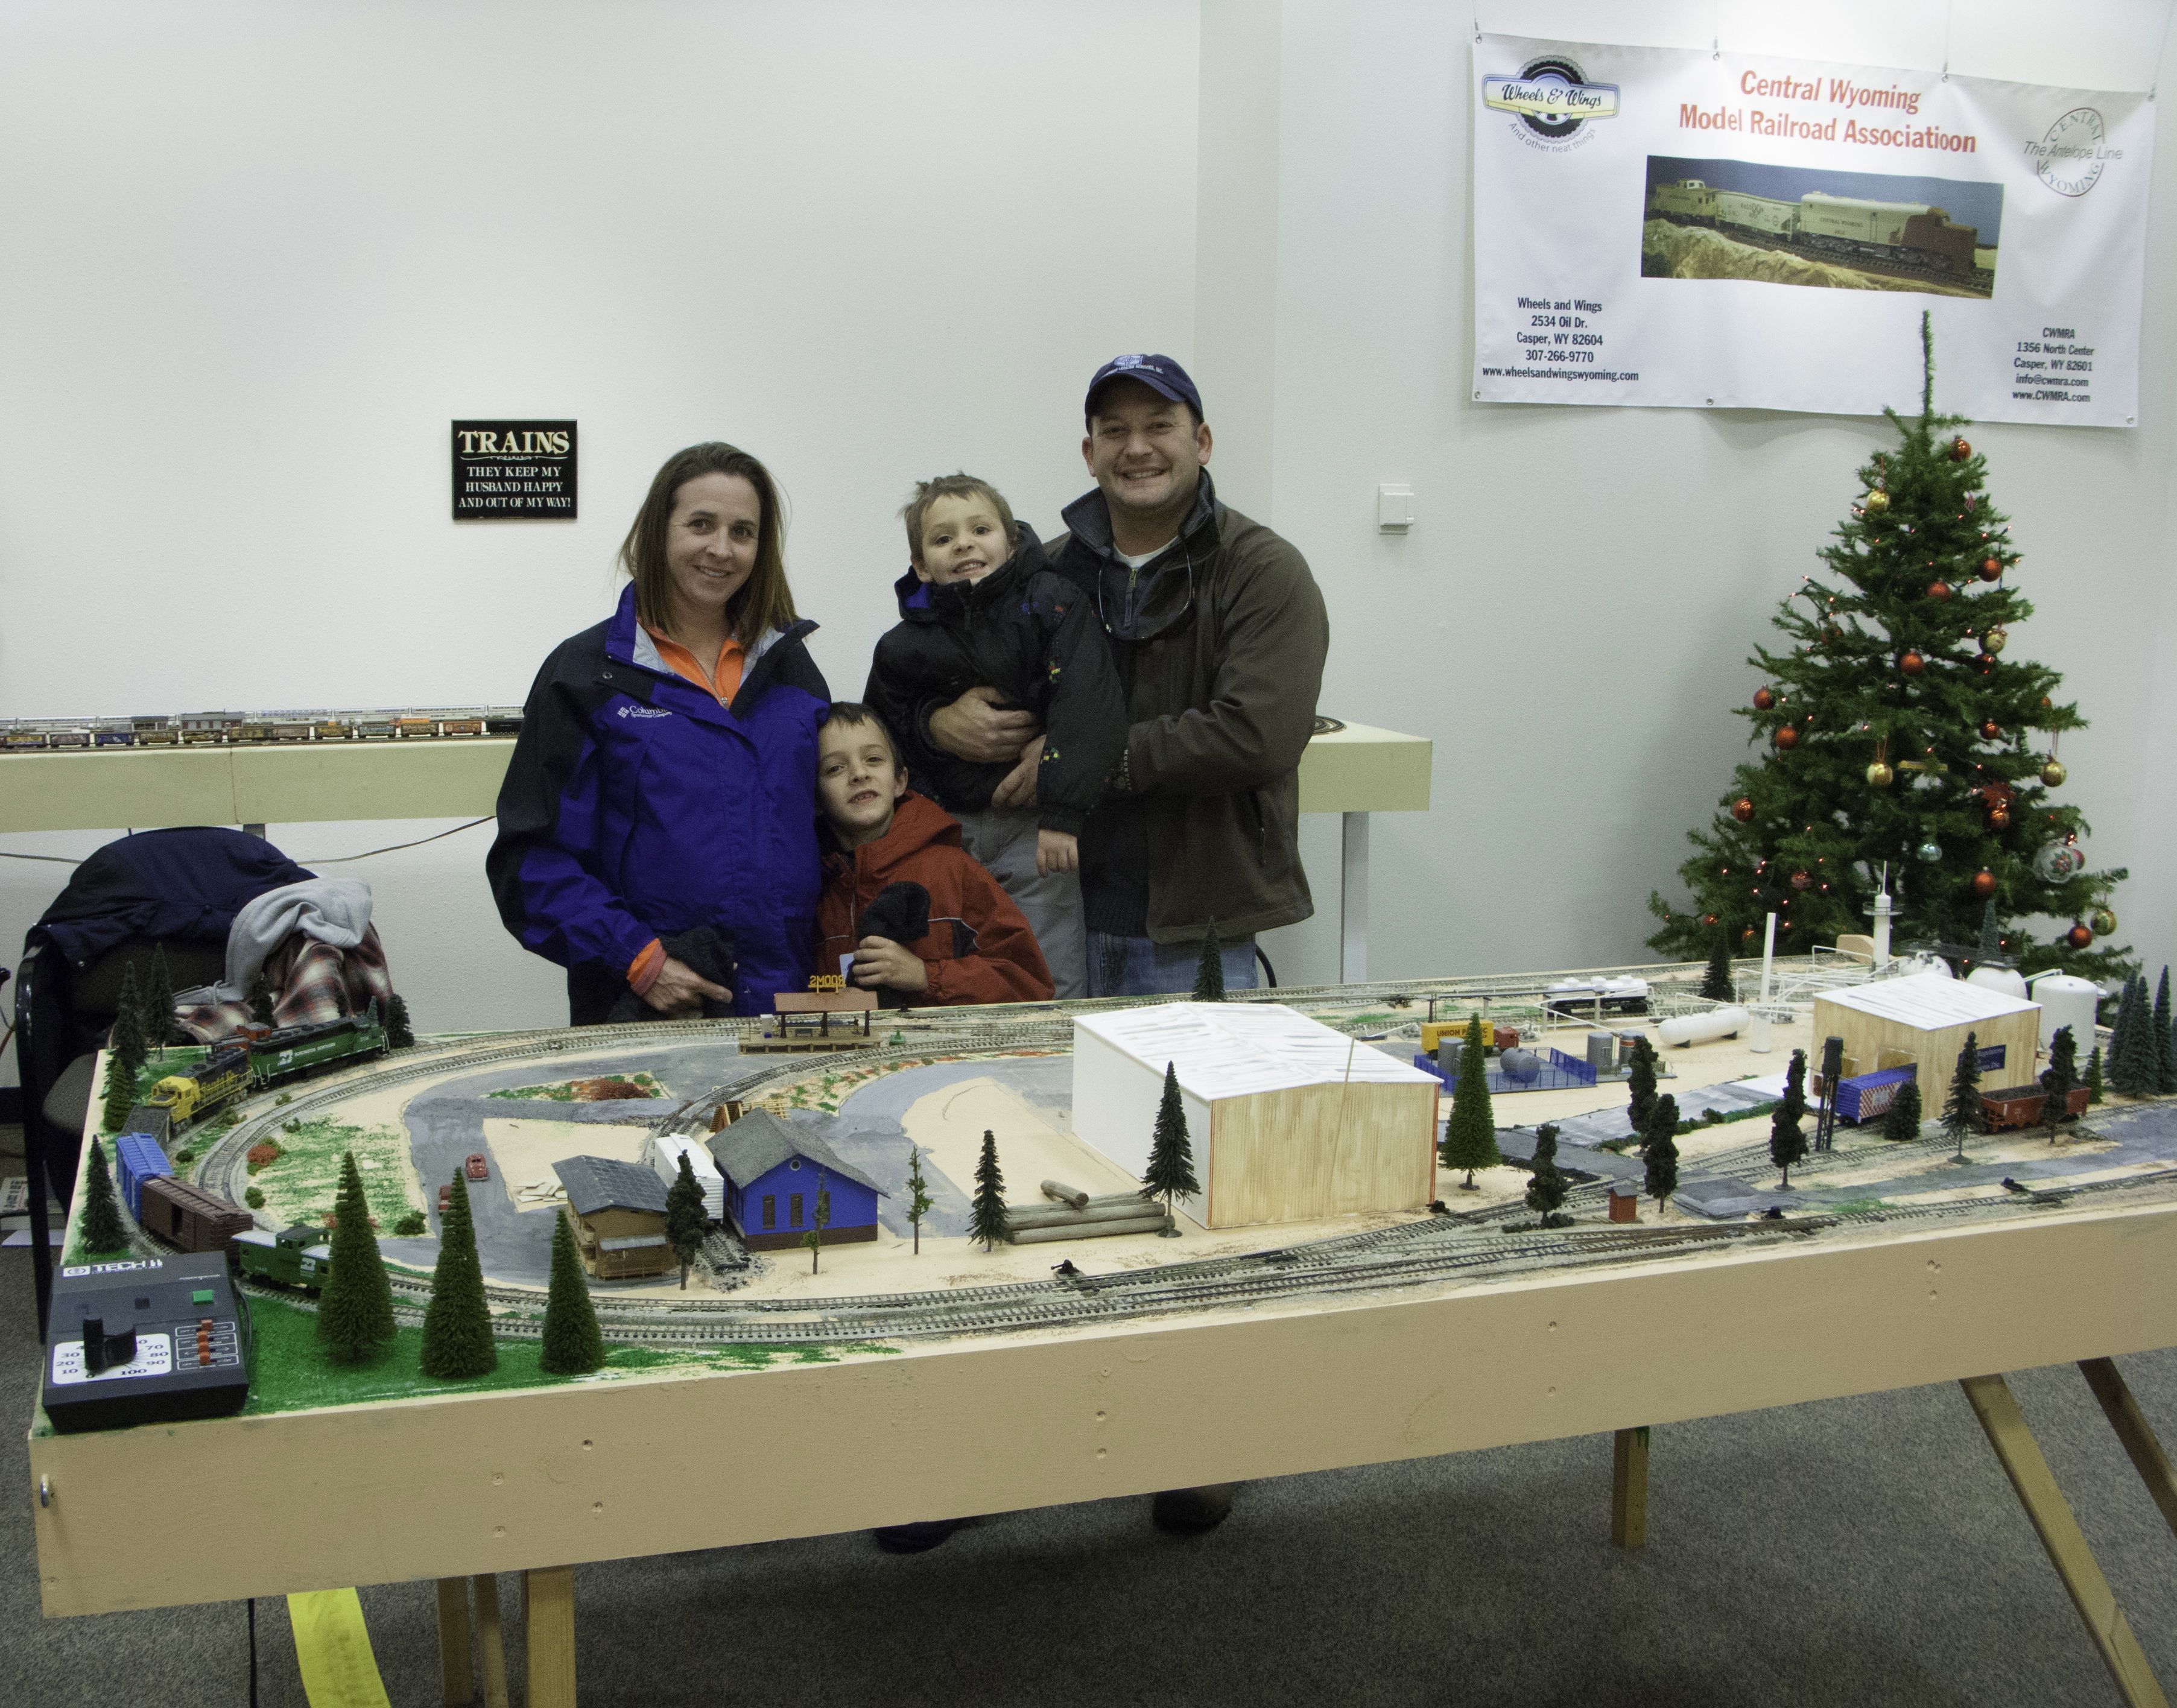 Photos from the NHTIC display in December, 2011